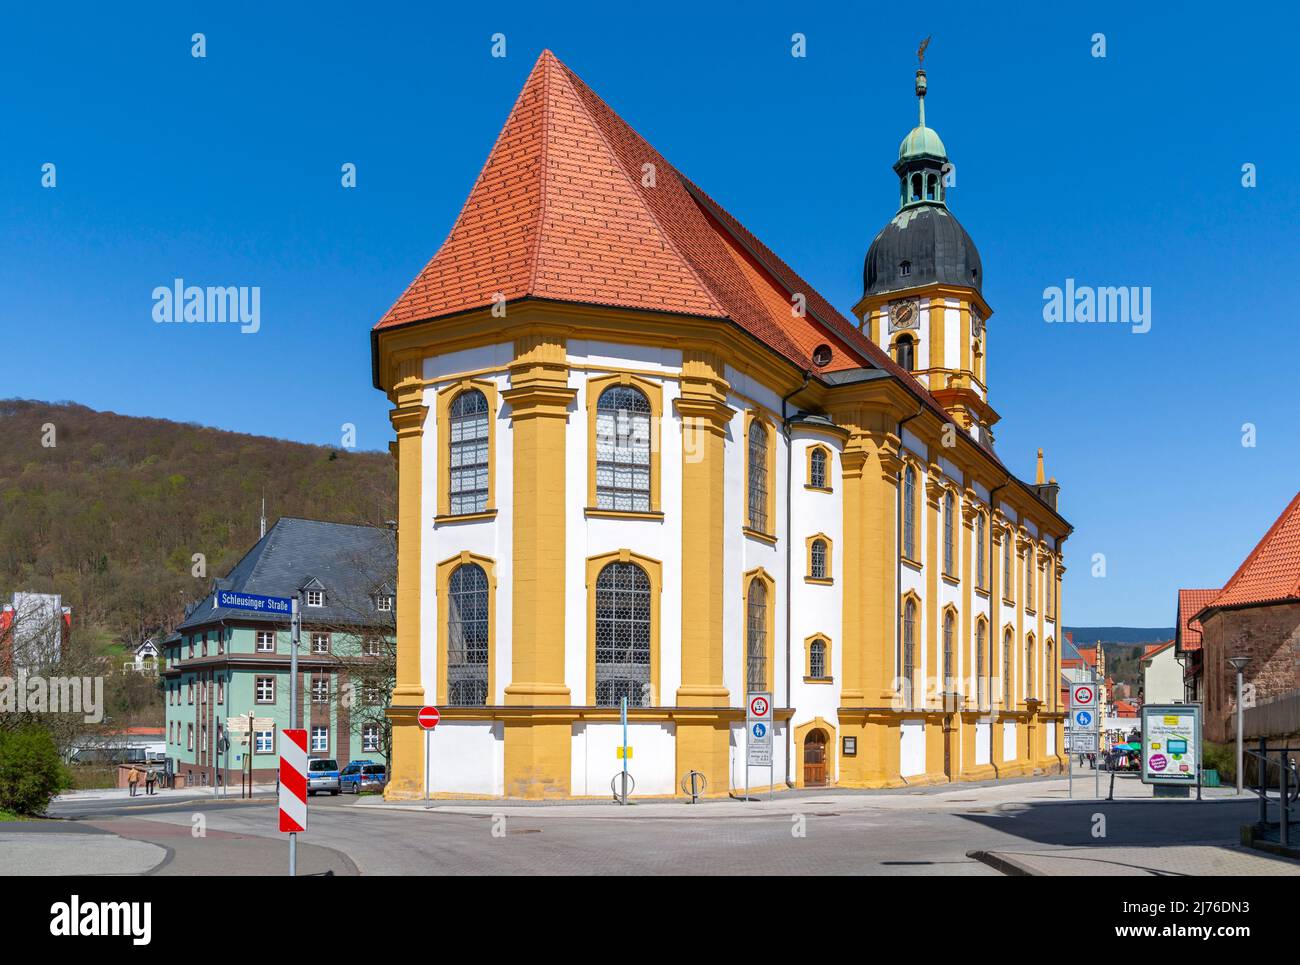 Germany, Suhl, the Lutheran Kreuzkirche was built from 1731 to 1739. The facade of the six-axis nave is divided by two-story round-arched windows and pilasters. Stock Photo